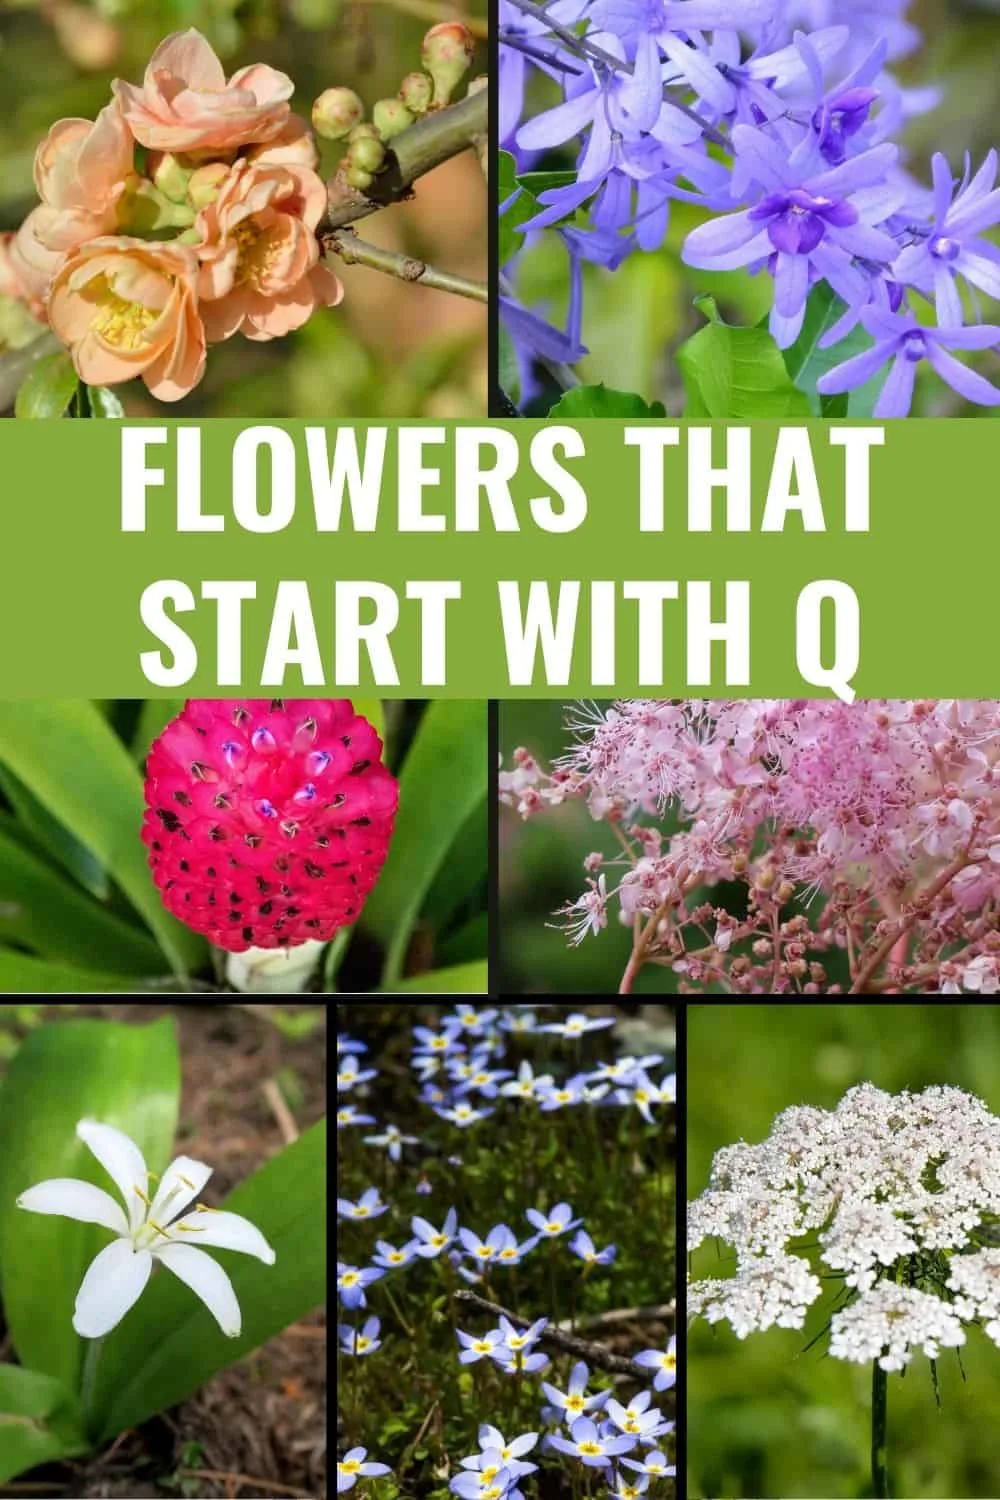 Flowers that start with q